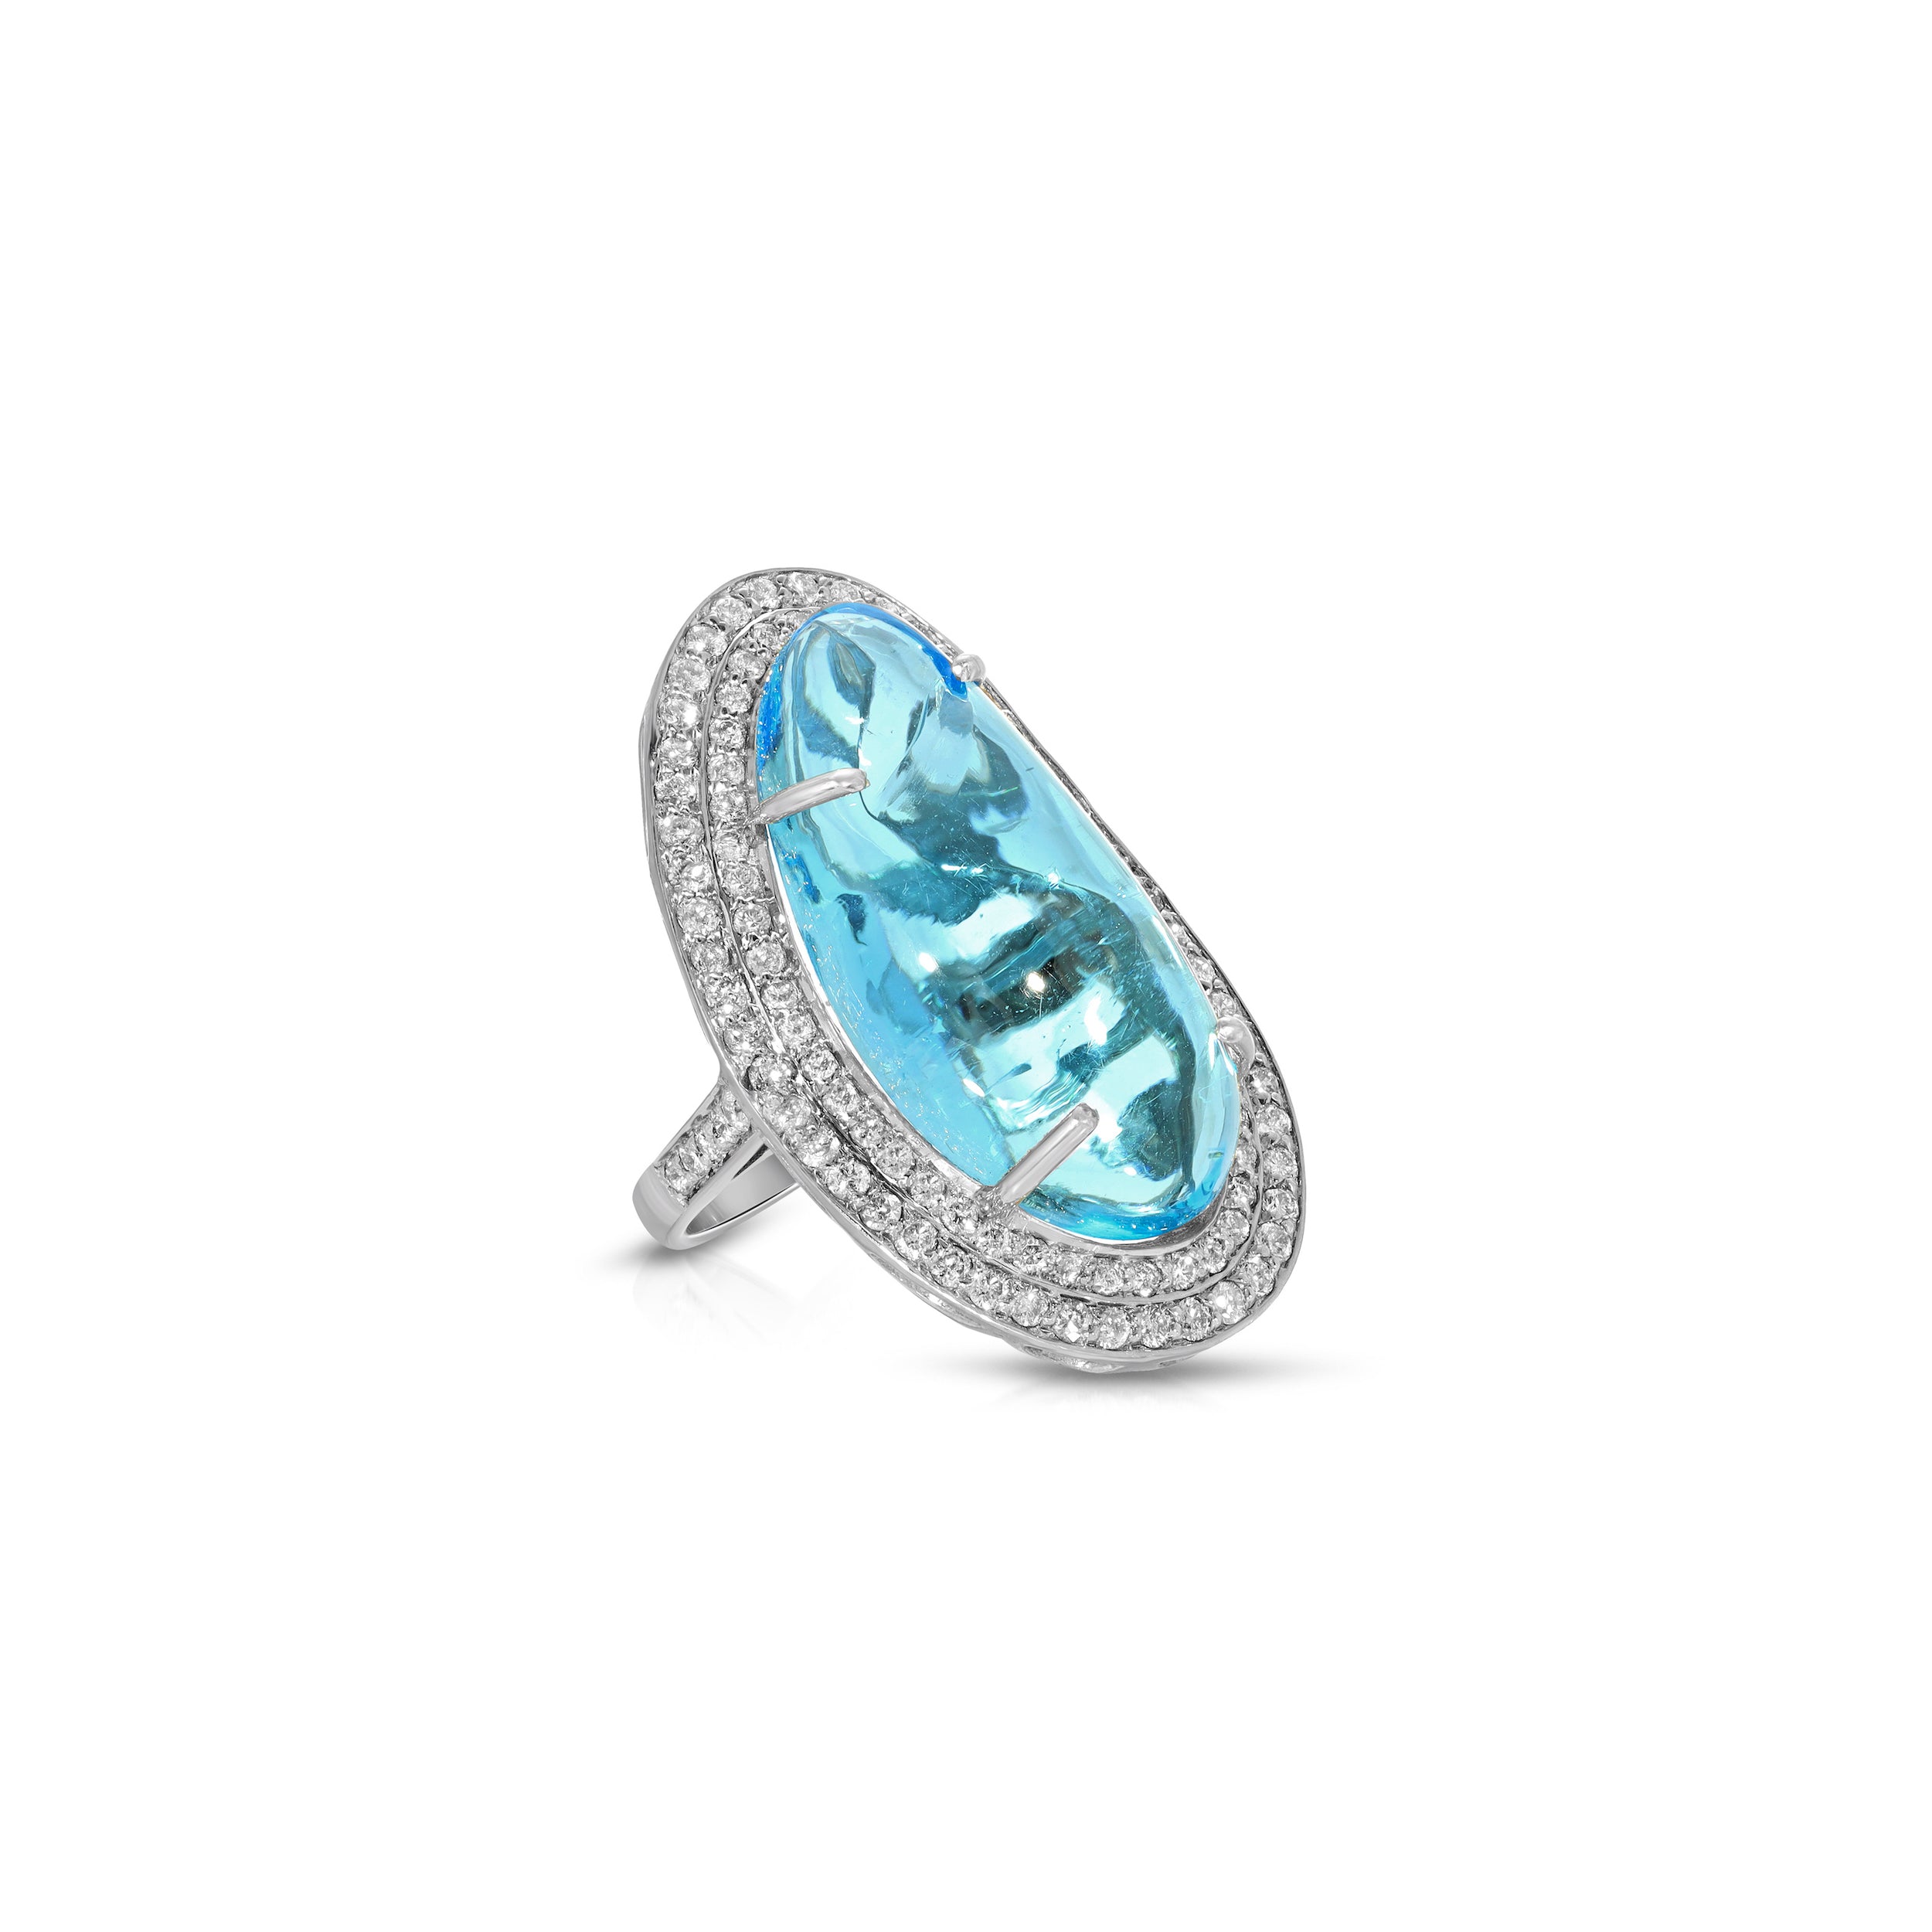 Abstract Blue Topaz Diamond Cocktail Ring